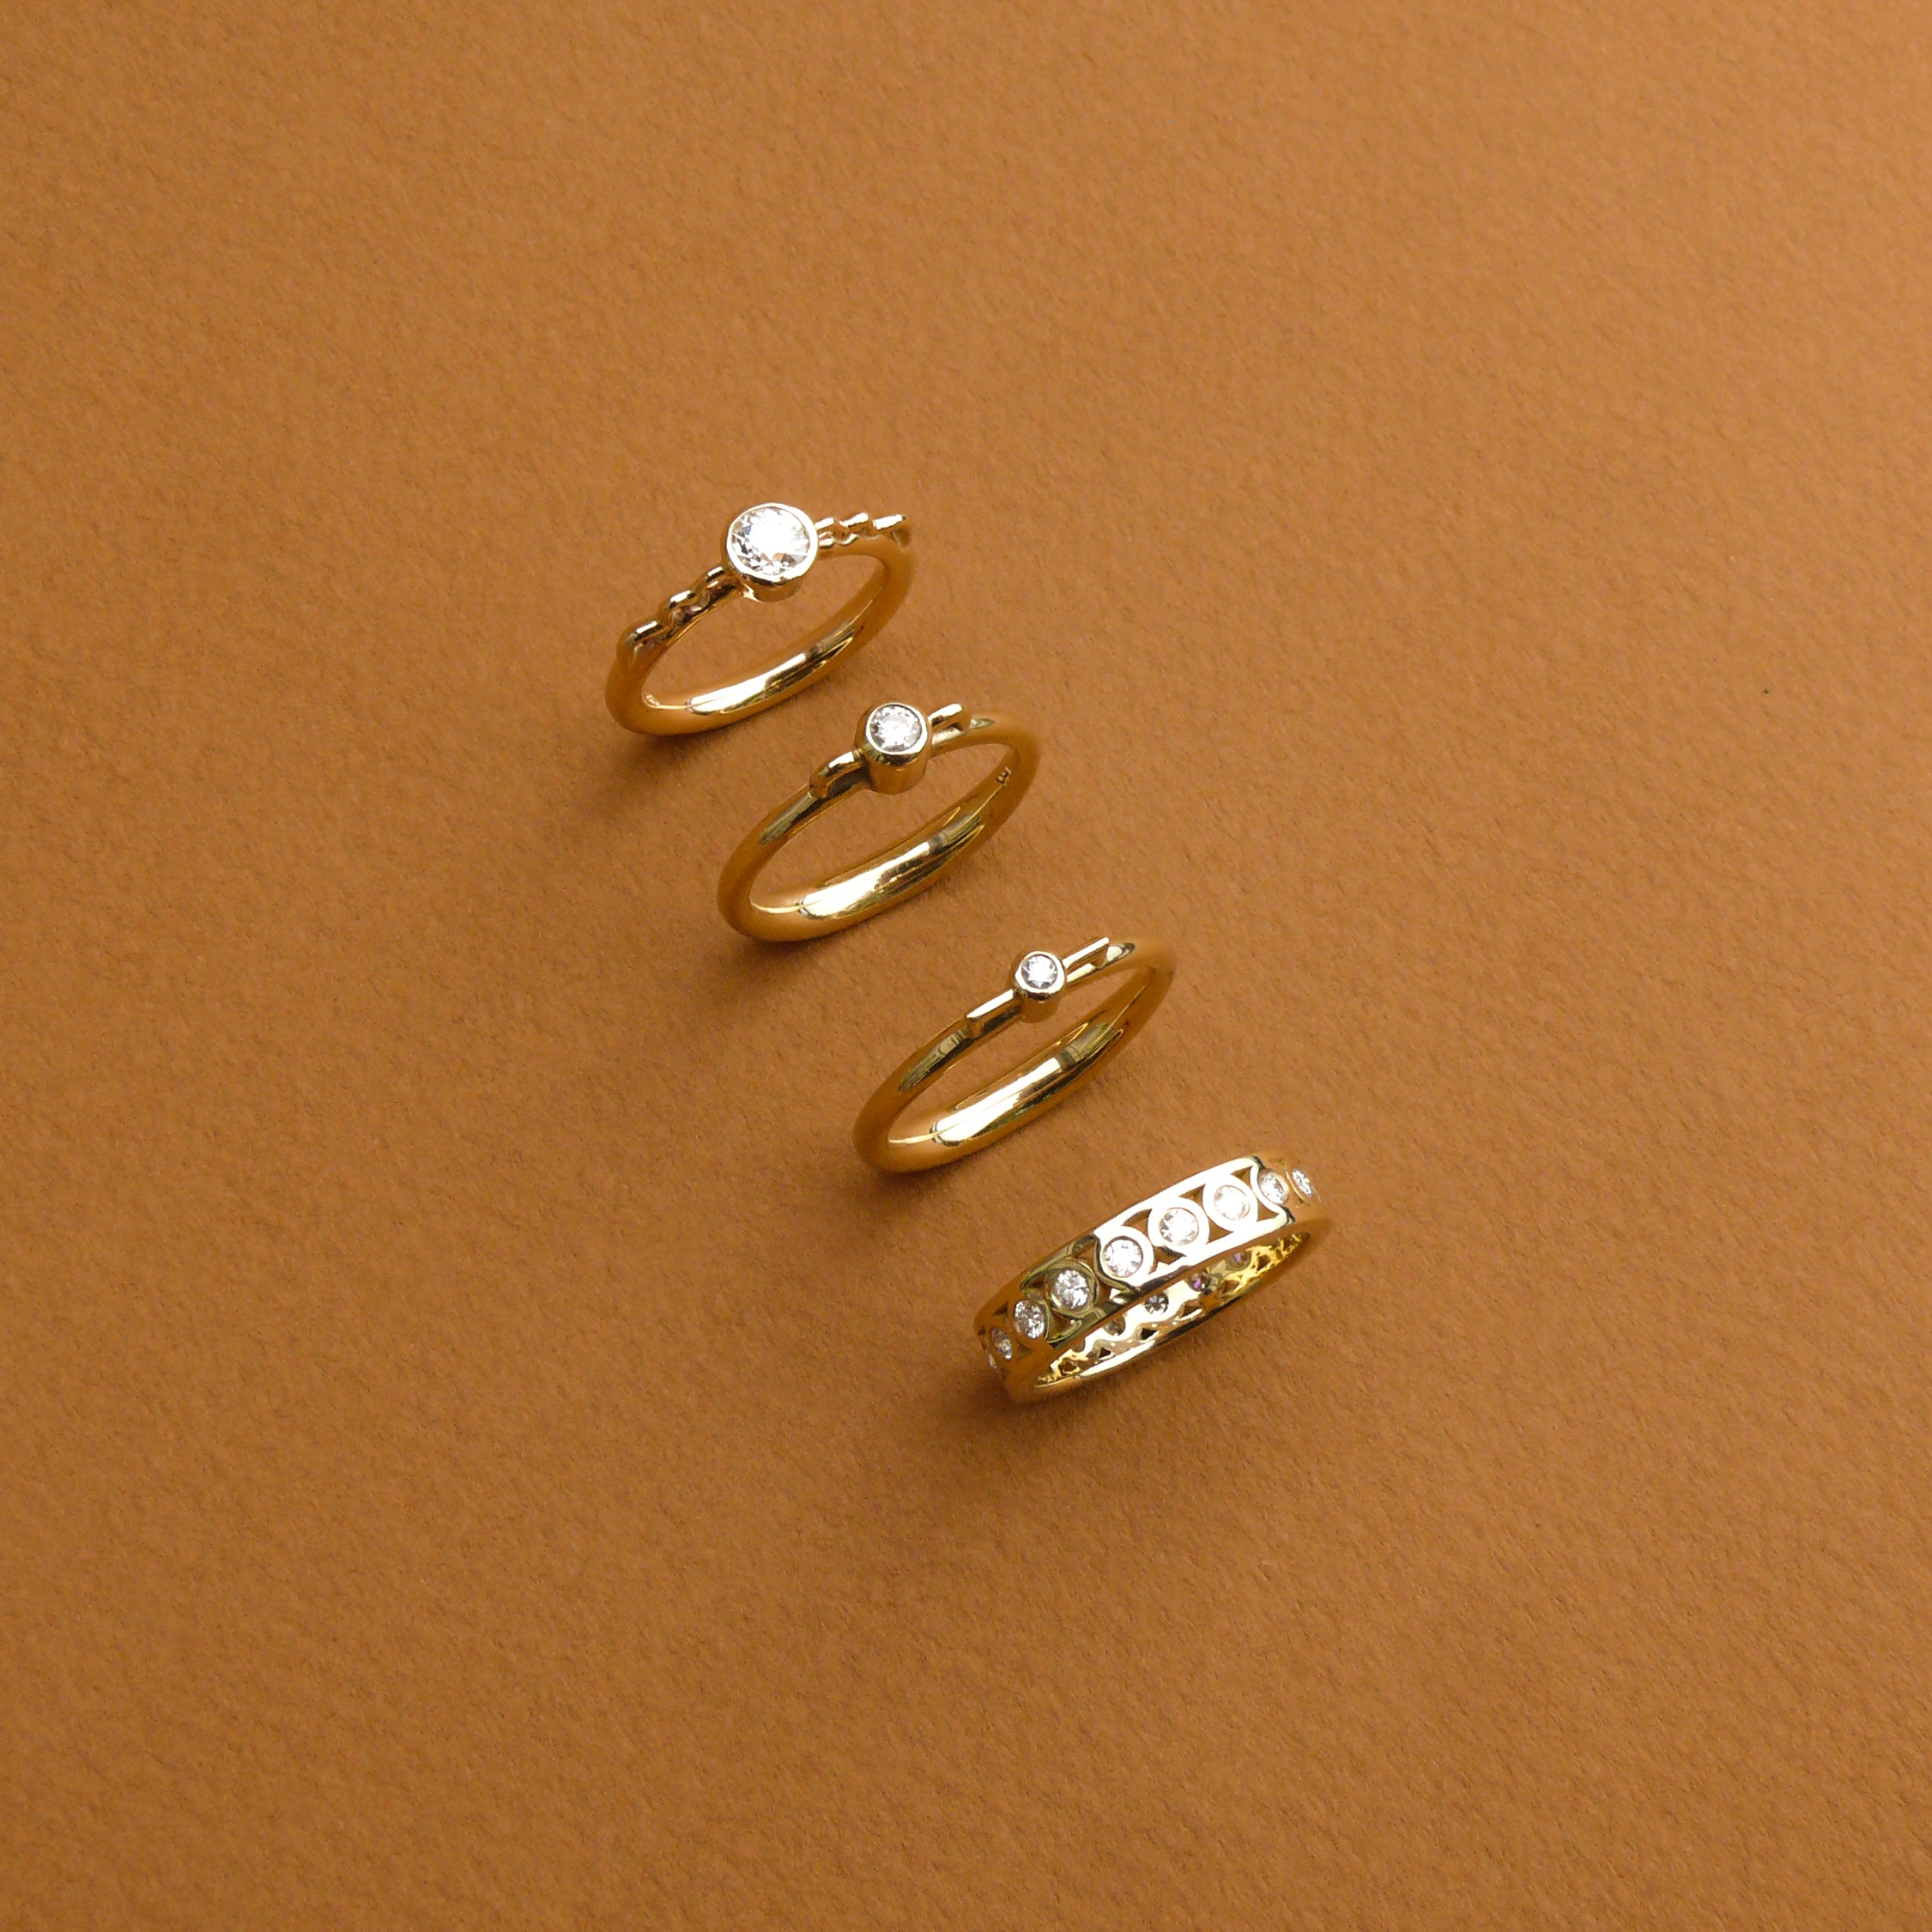 Four rings, all white diamond bezel set on gold rings that have the profile of a vessel. One ring is a diamond eternity band.